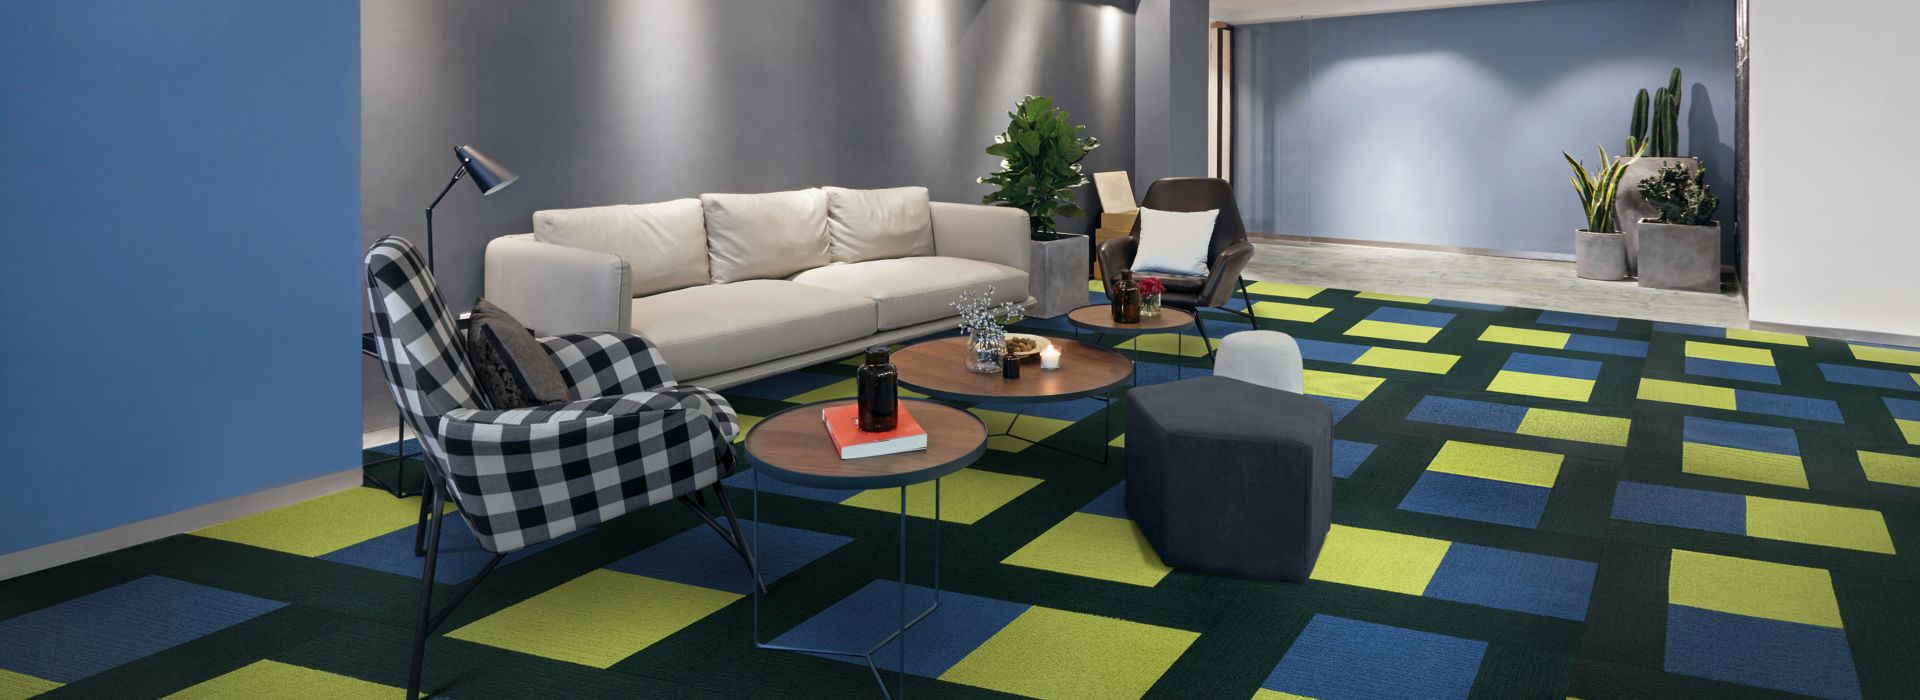 Interface Viva Colores carpet tile and Textured Stones LVT in seating area with couch  imagen número 1